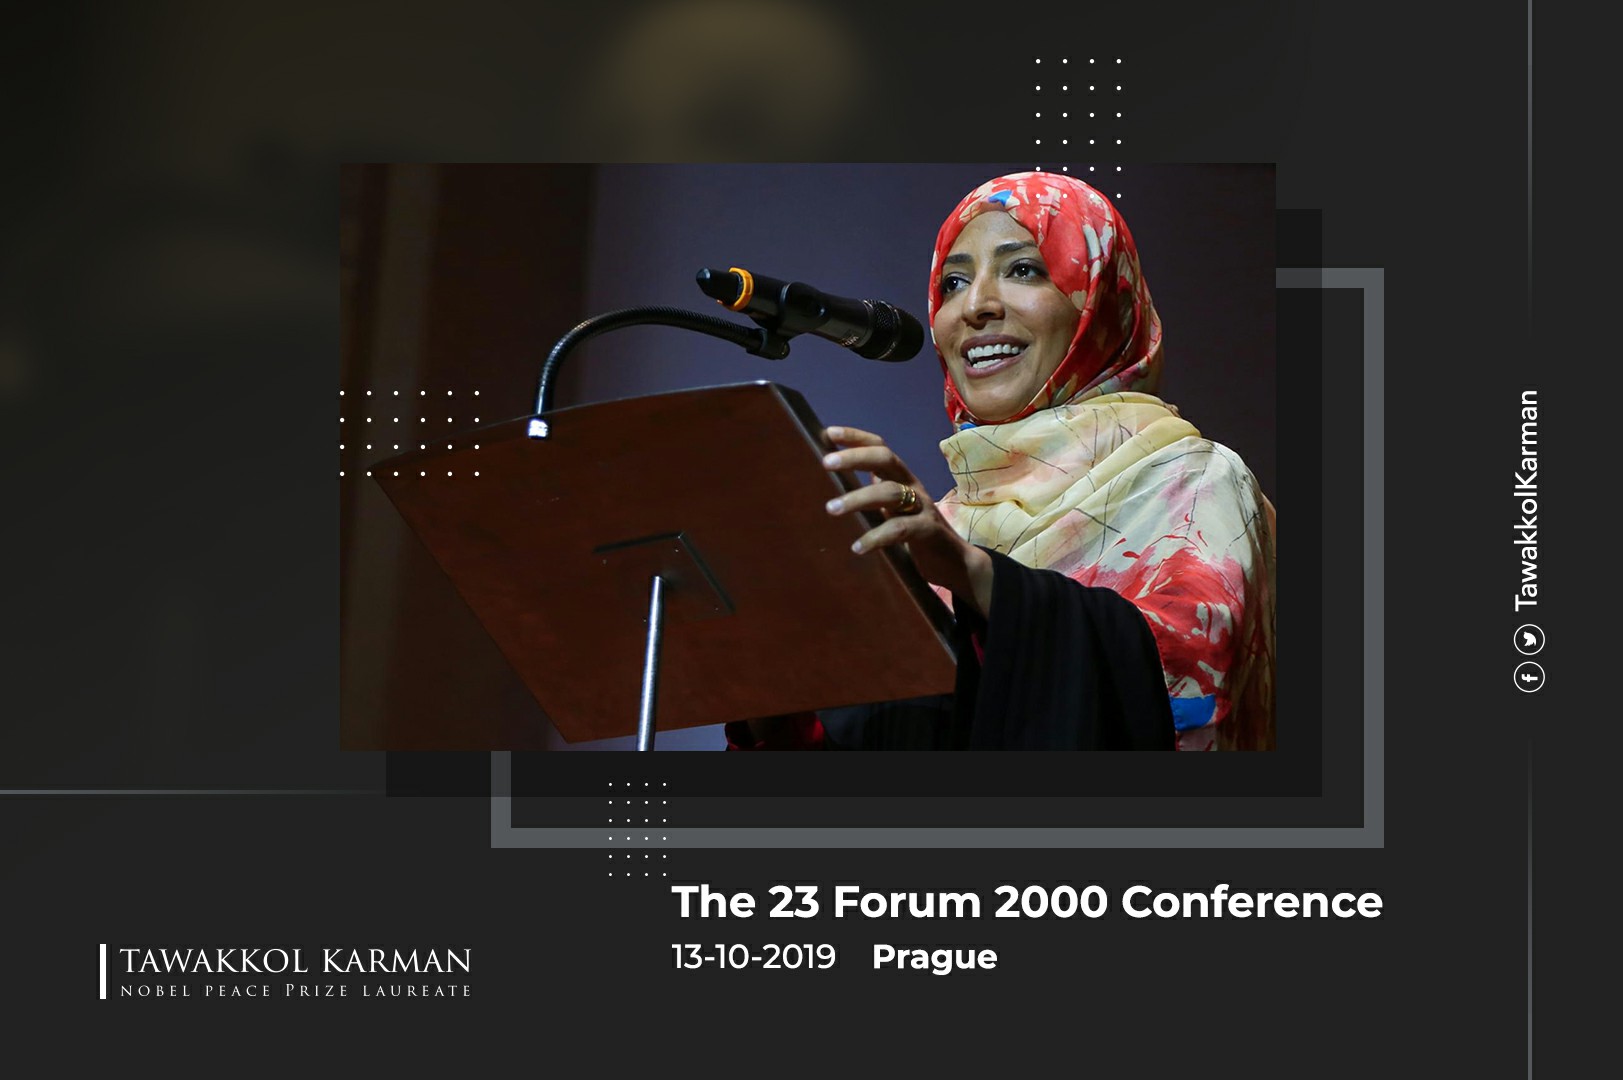 Participation of Tawakkol Karman in the 23 Forum 2000 Conference, Prague